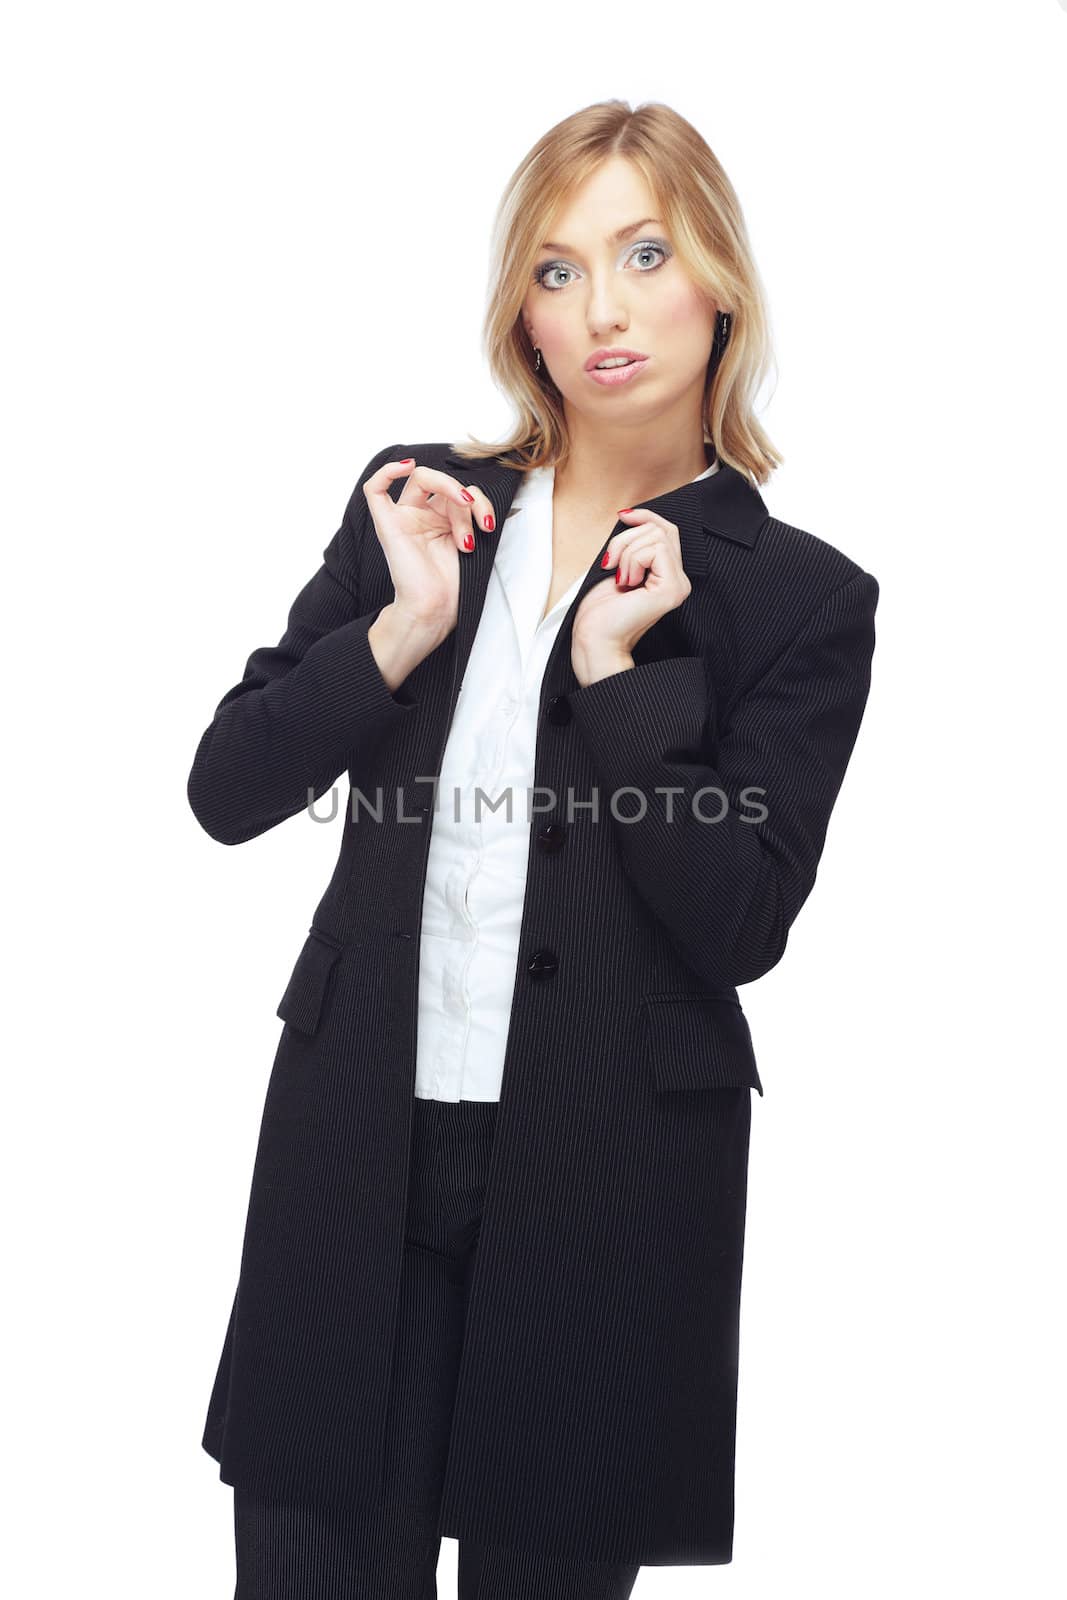 Attractive businesswoman by Novic